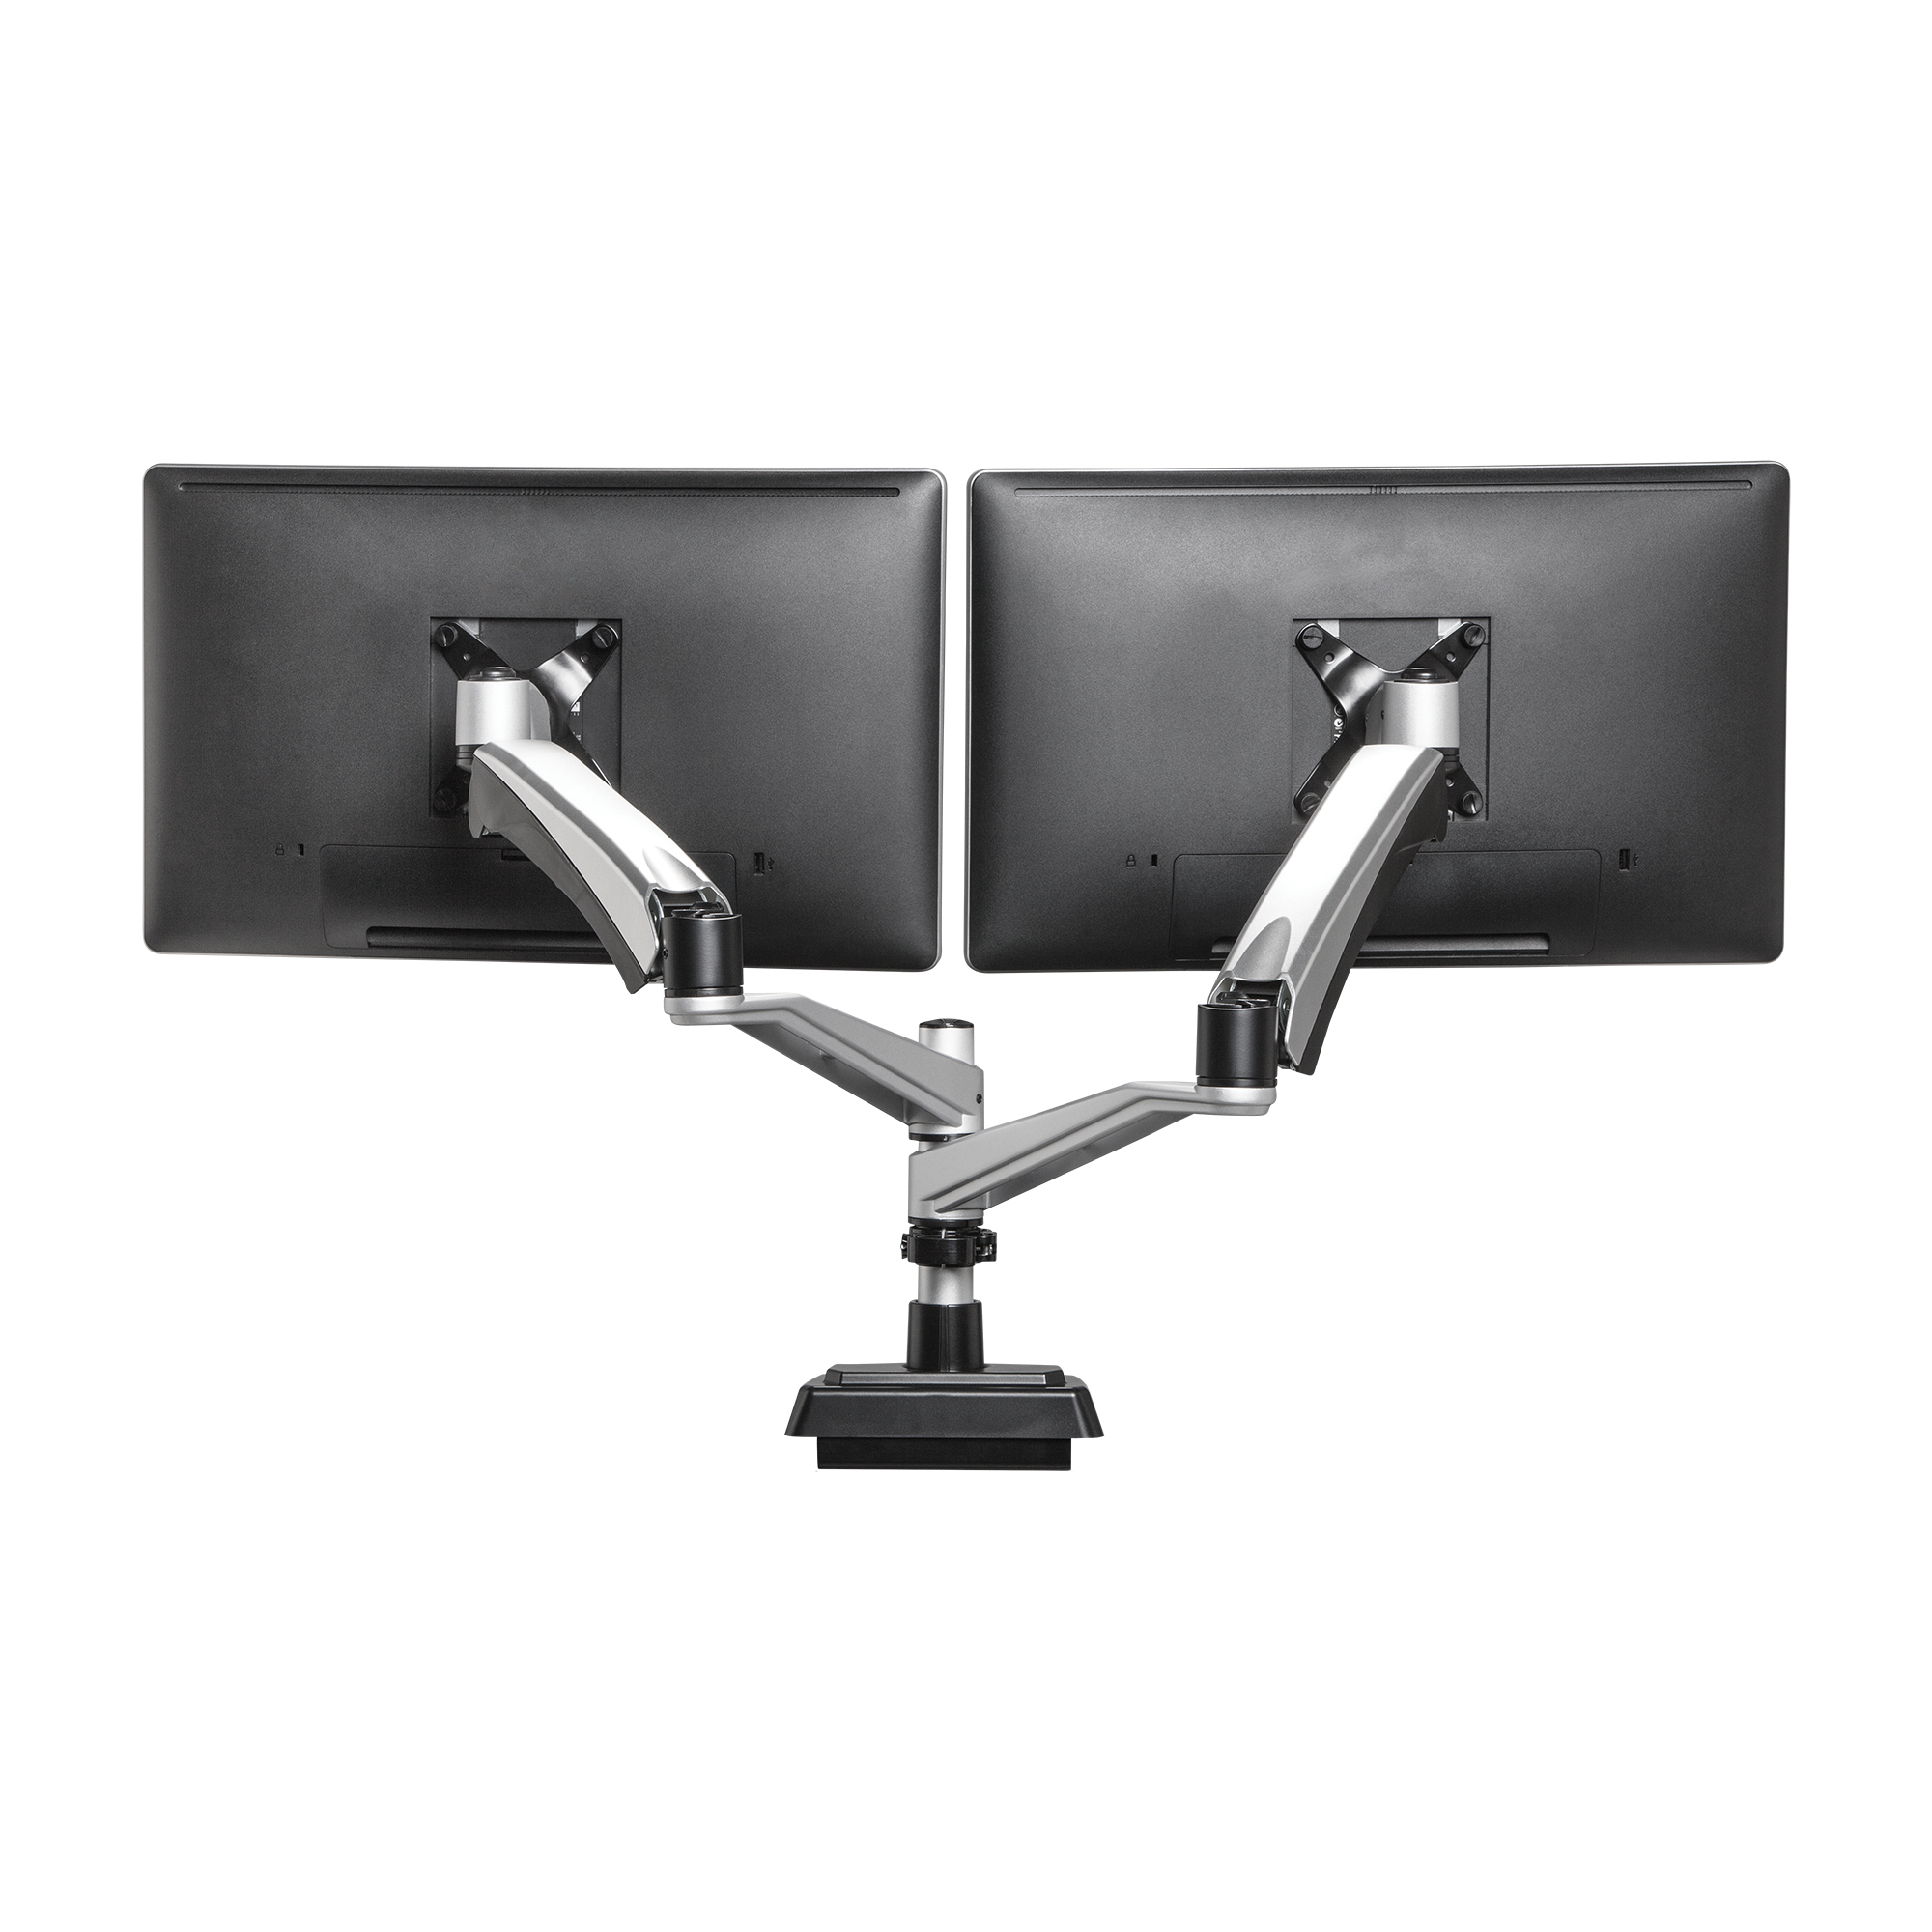 Dual-Monitor Arm - Open Box, Monitor Stands